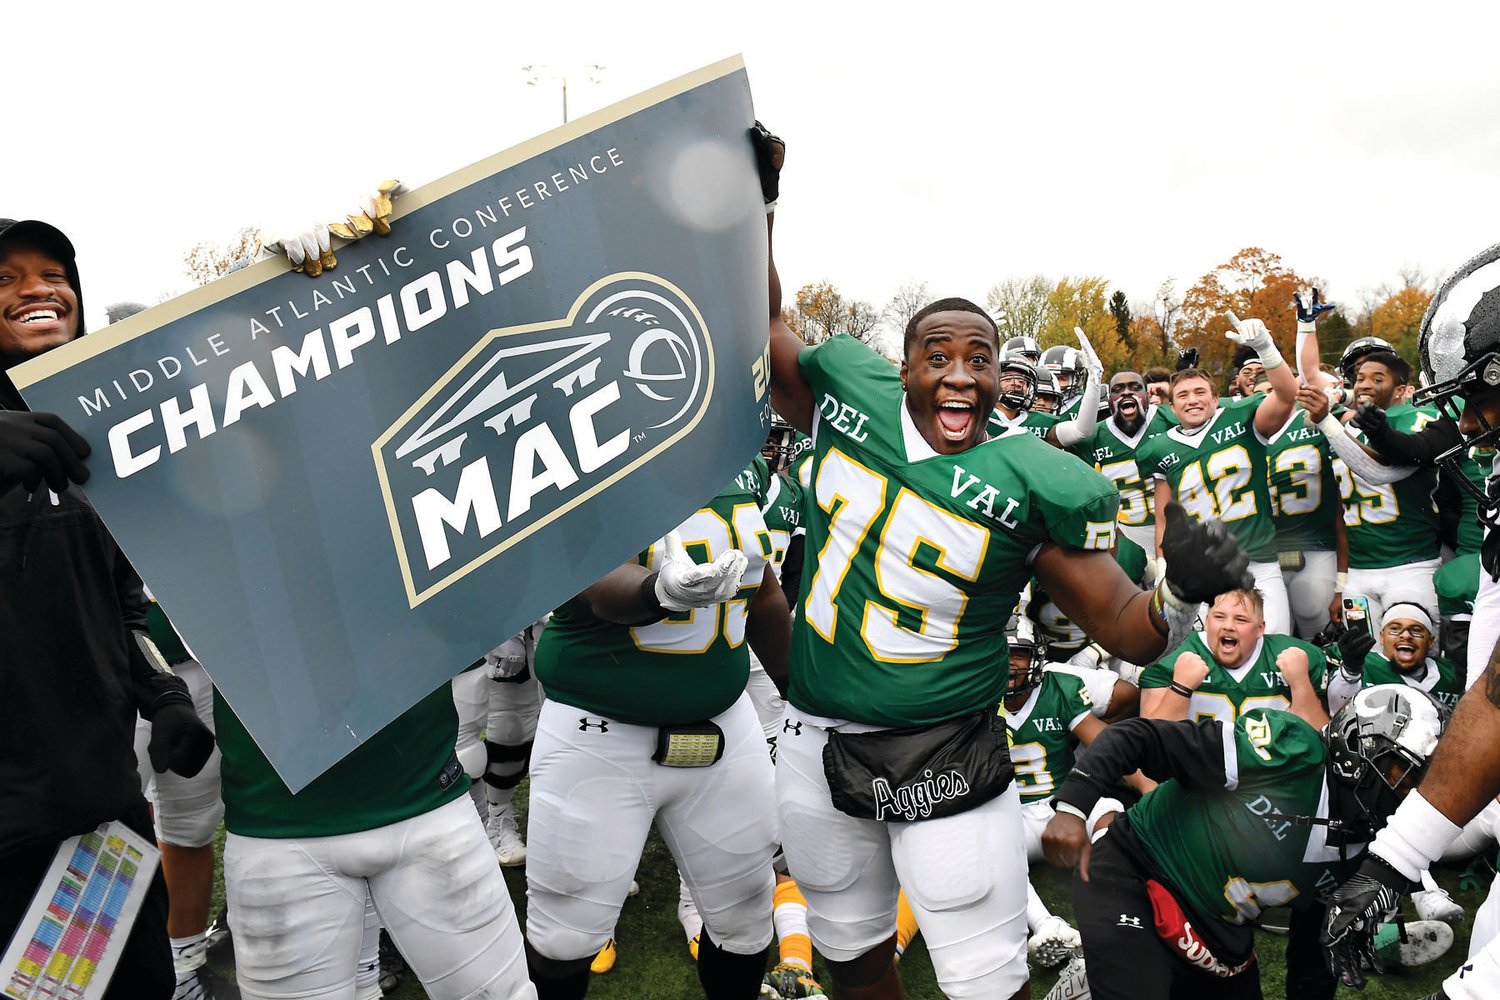 Delaware Valley University football players celebrate winning their fourth consecutive MAC title.